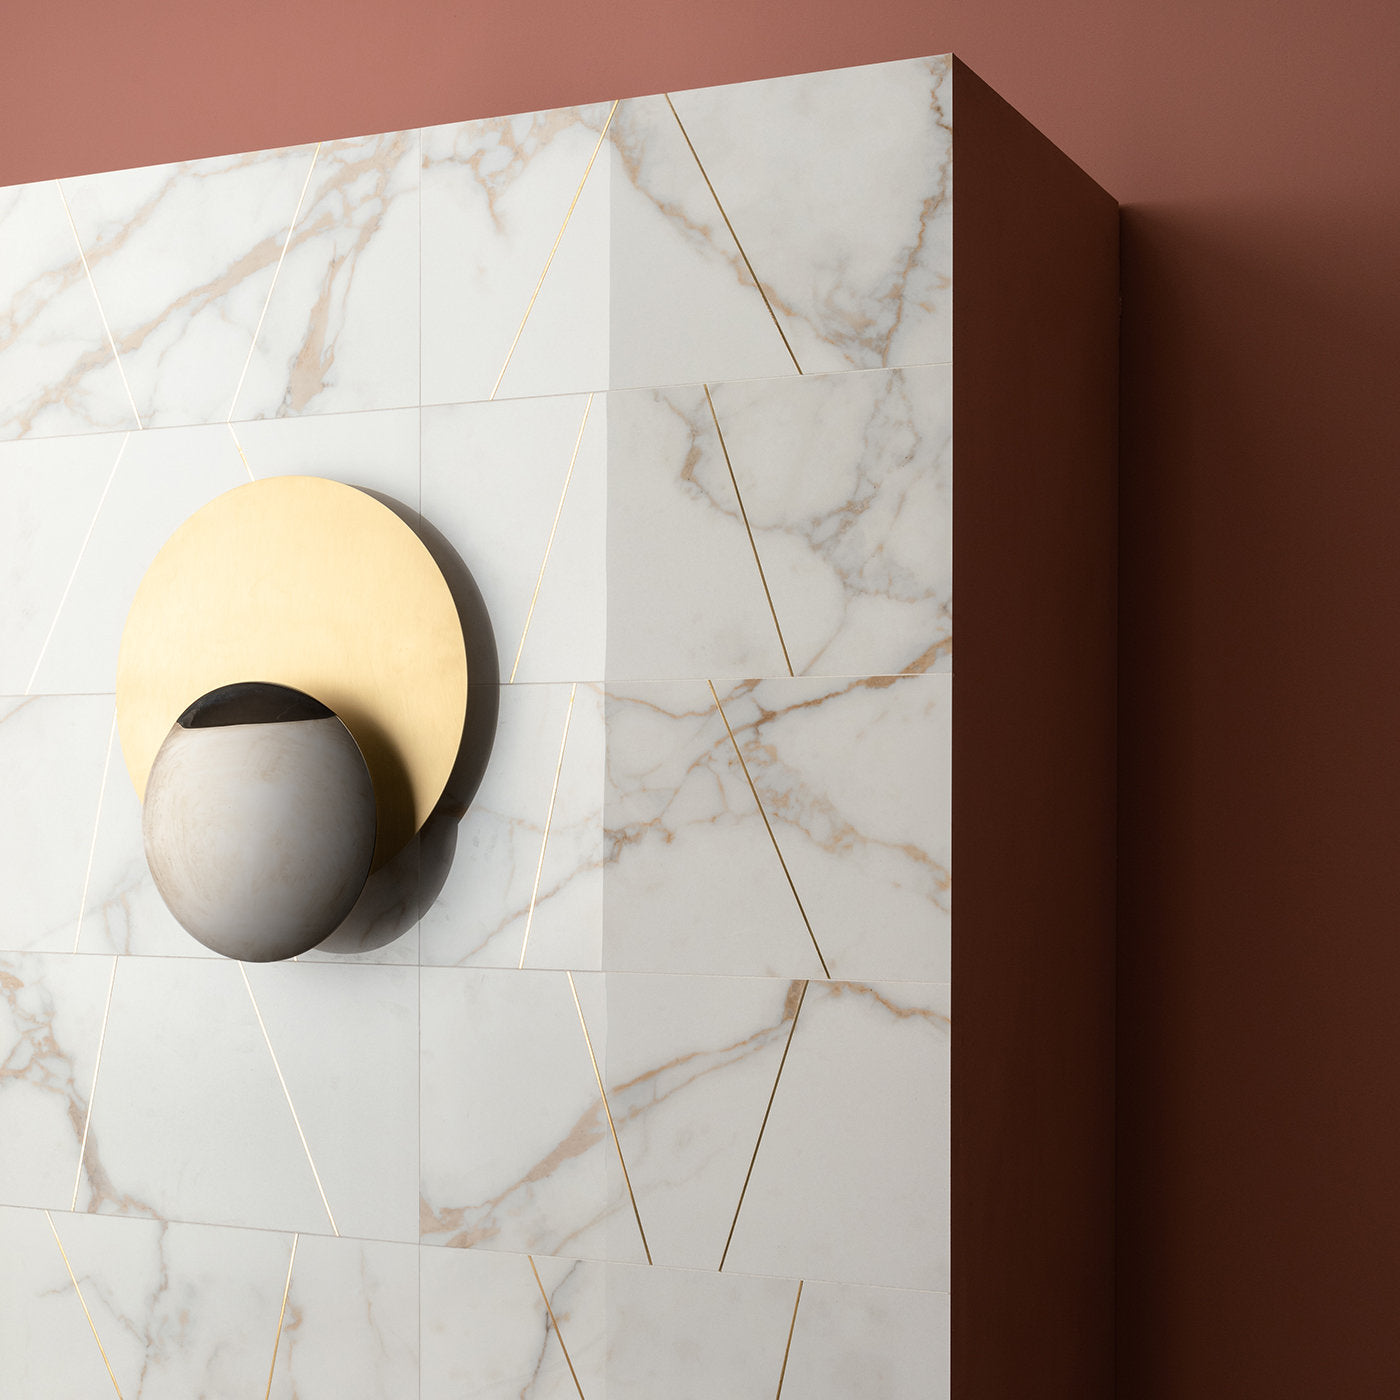 Scur & Ciar Sconce by Isacco Brioschi - Alternative view 2